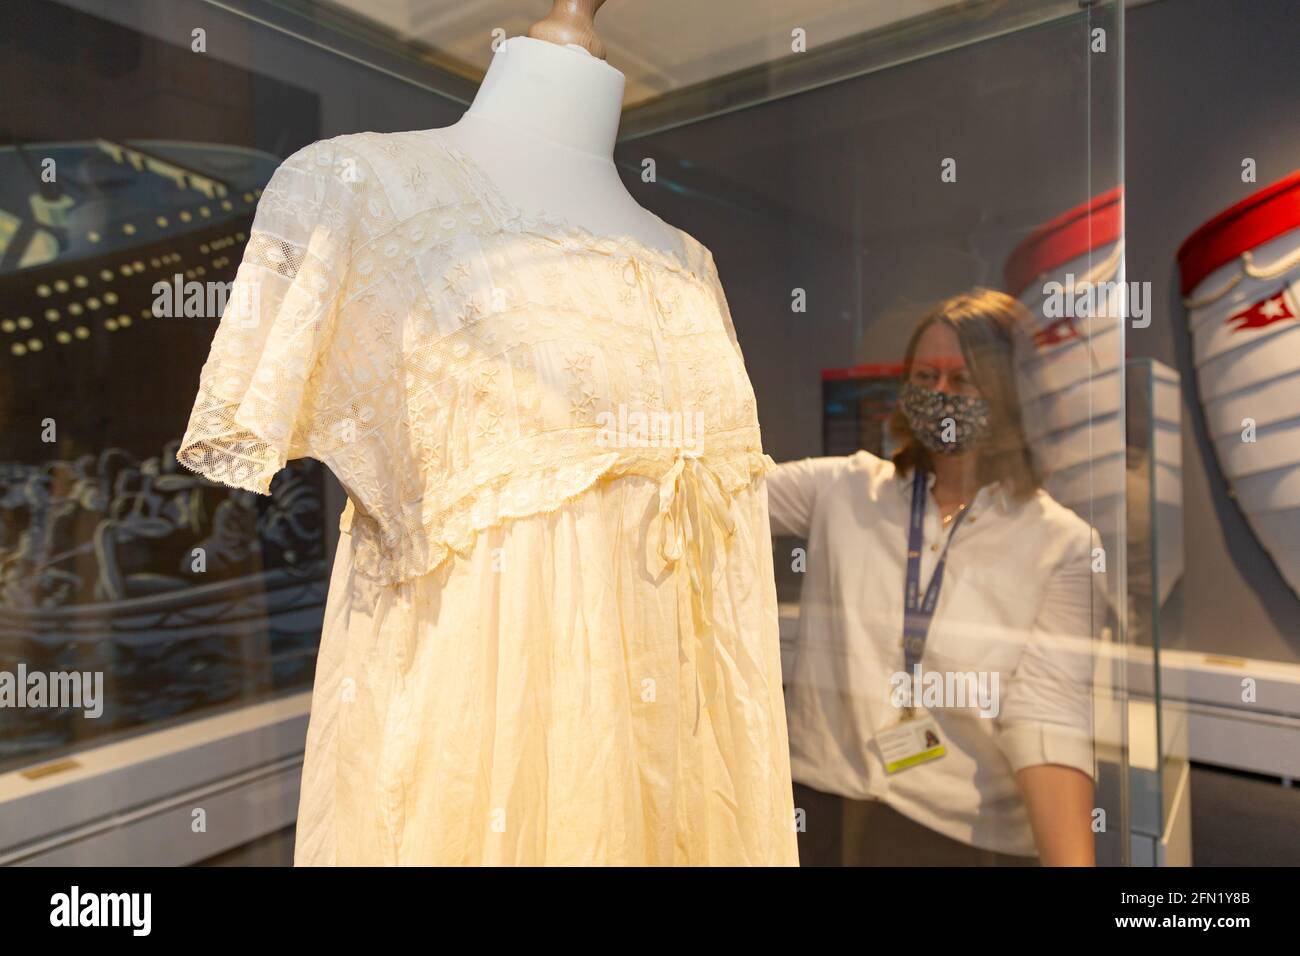 Worcester, UK. 13th May, 2021. Claire Cheshire, curator at Worcester City Art Gallery and Museum, takes a final look at a nightdress worn by a woman on the night the Titanic sank in 1912, as the museum launches an exhibition Titanic: Honour and Glory. The exhibits include genuine artefacts and memorabilia from the 1997 movie, and will be on show from Monday 17th May. Peter Lopeman/Alamy Live News Stock Photo